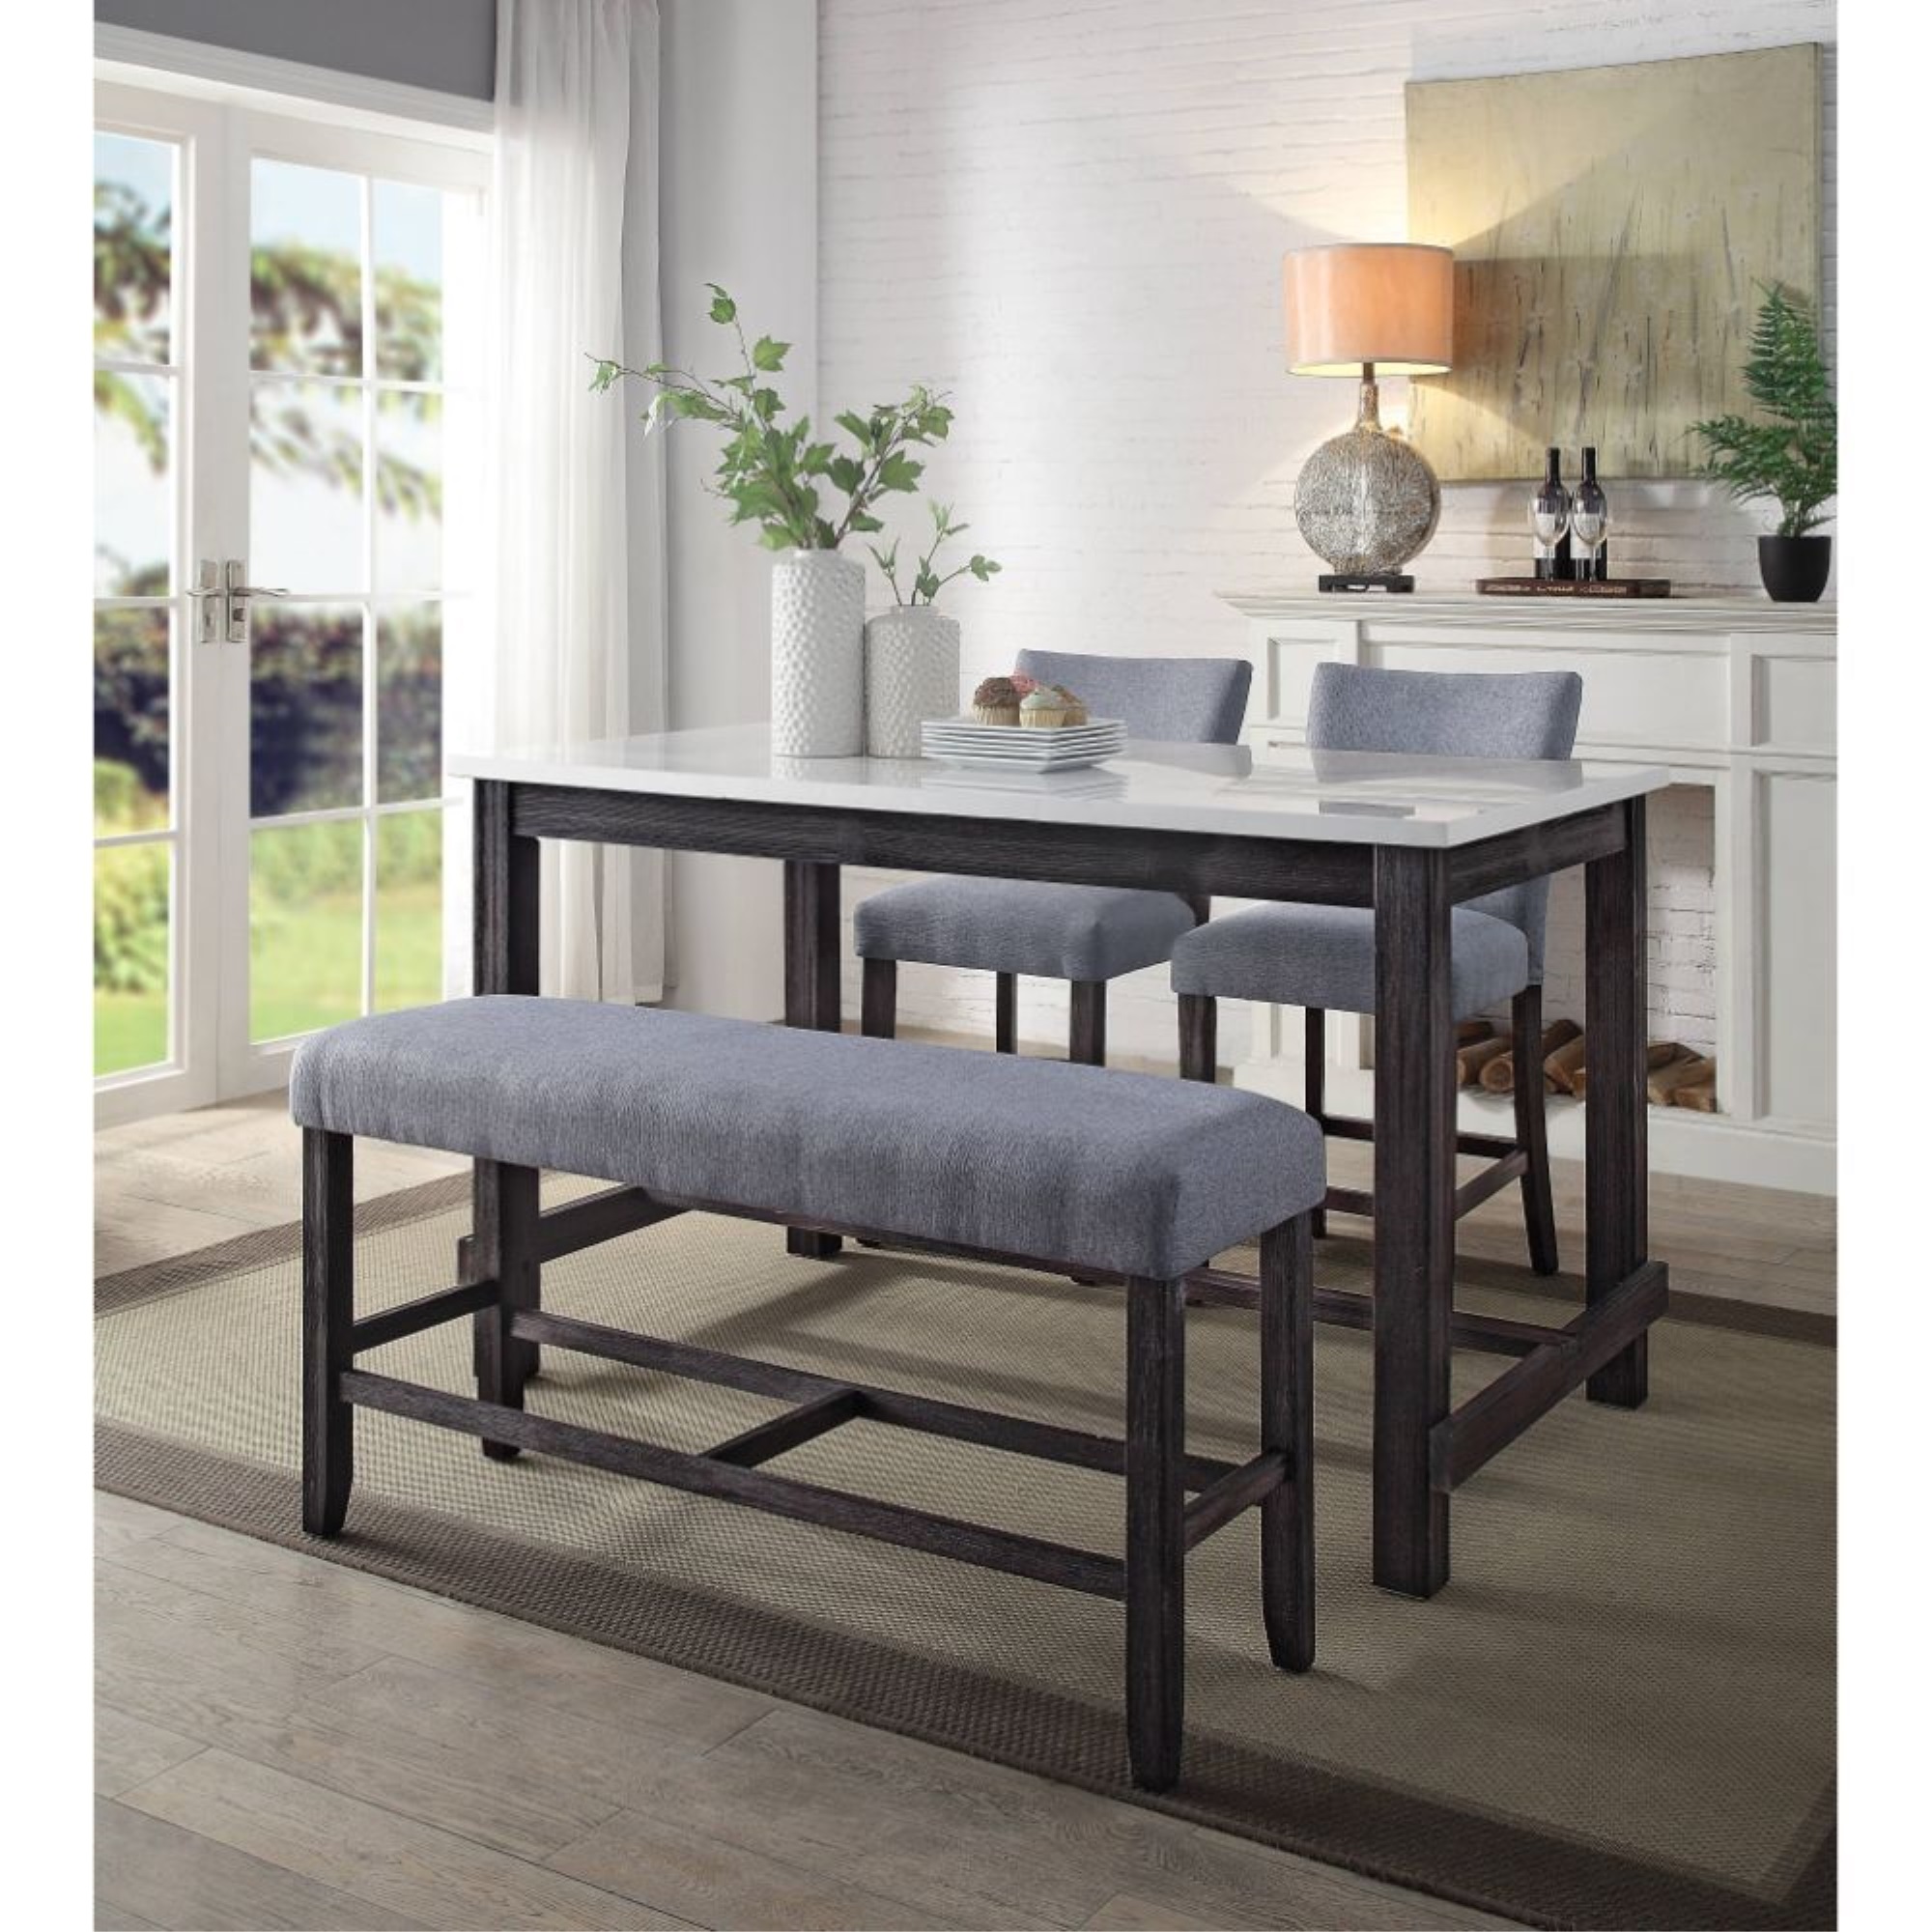 Acme Furniture Counter Height Bench, Fabric & Weathered Espresso